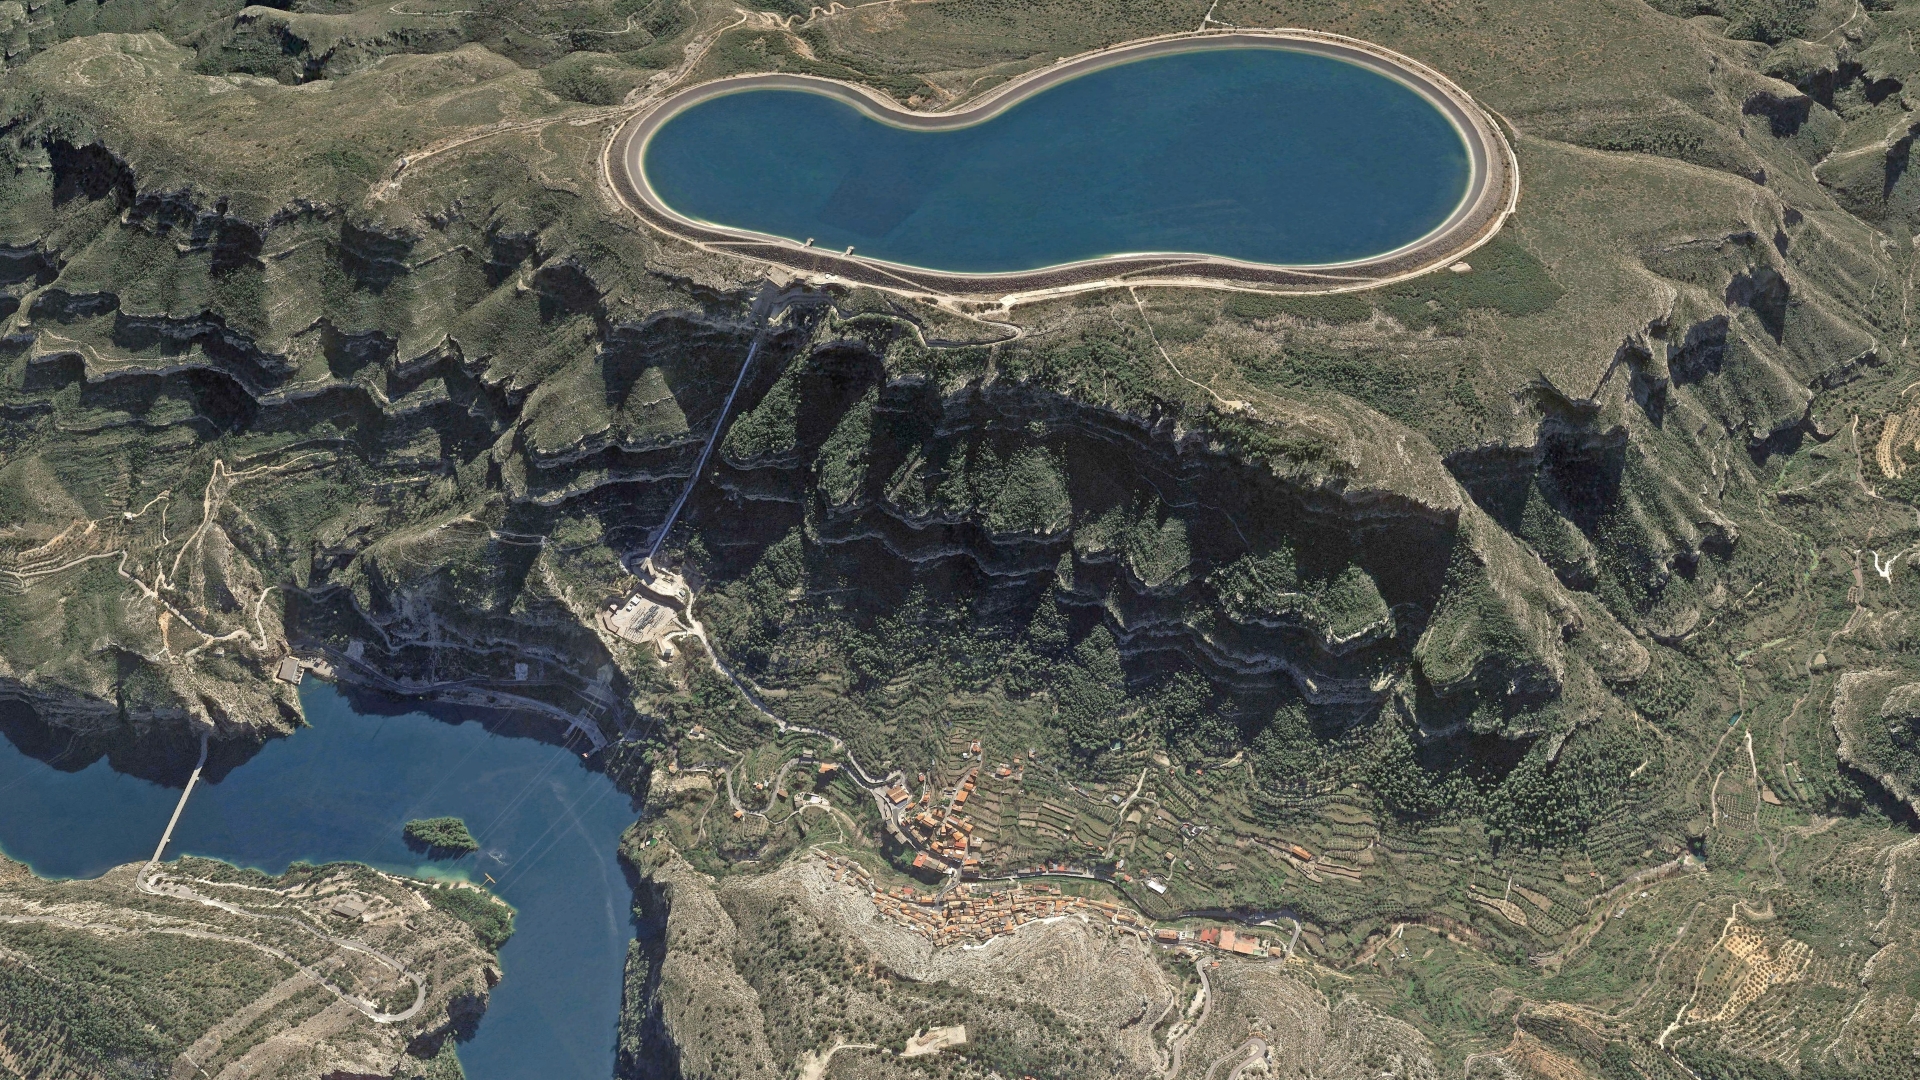 A pumped hydro energy storage plant in Spain.